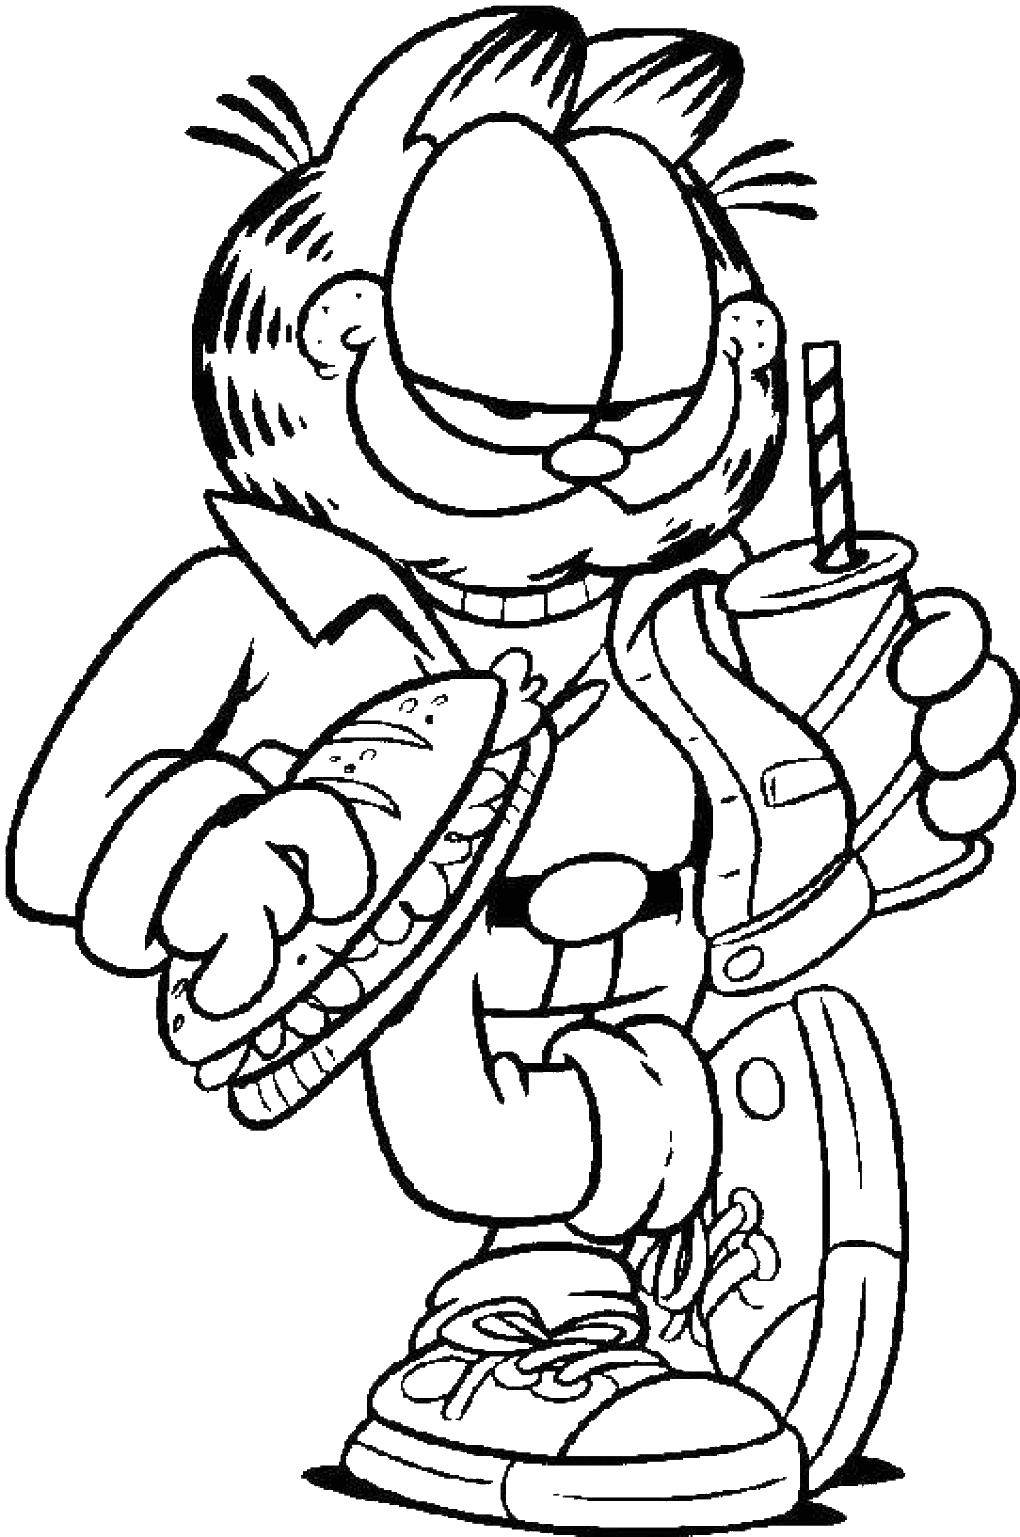 Coloring Garfield. Category cartoons. Tags:  Garfield , the course dog, Cola.